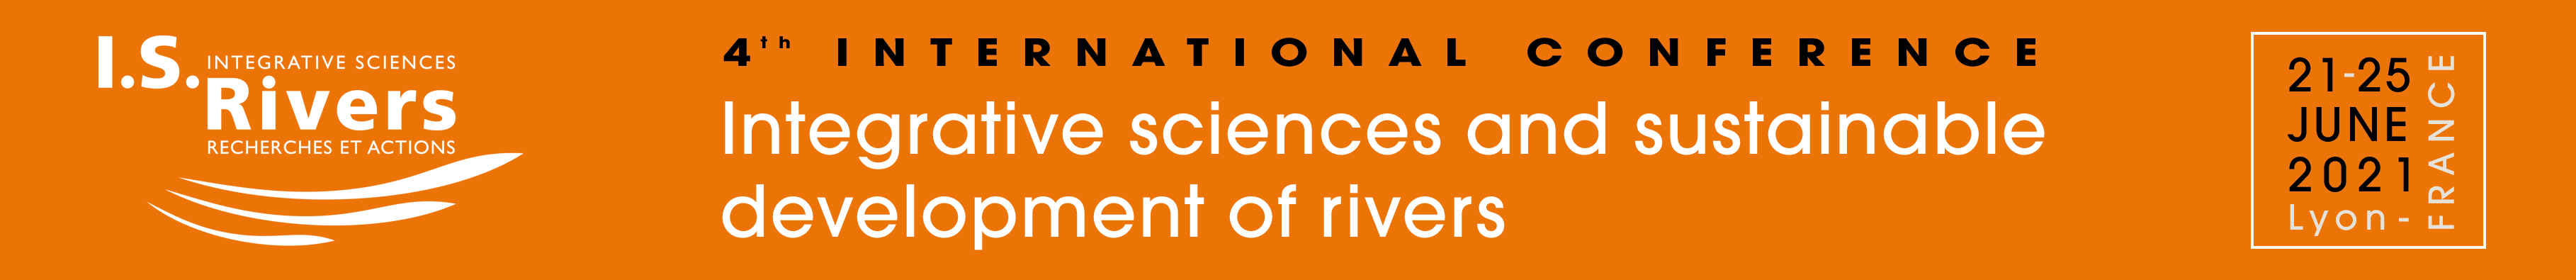 I.S.Rivers - Integrative sciences and sustainable development of rivers